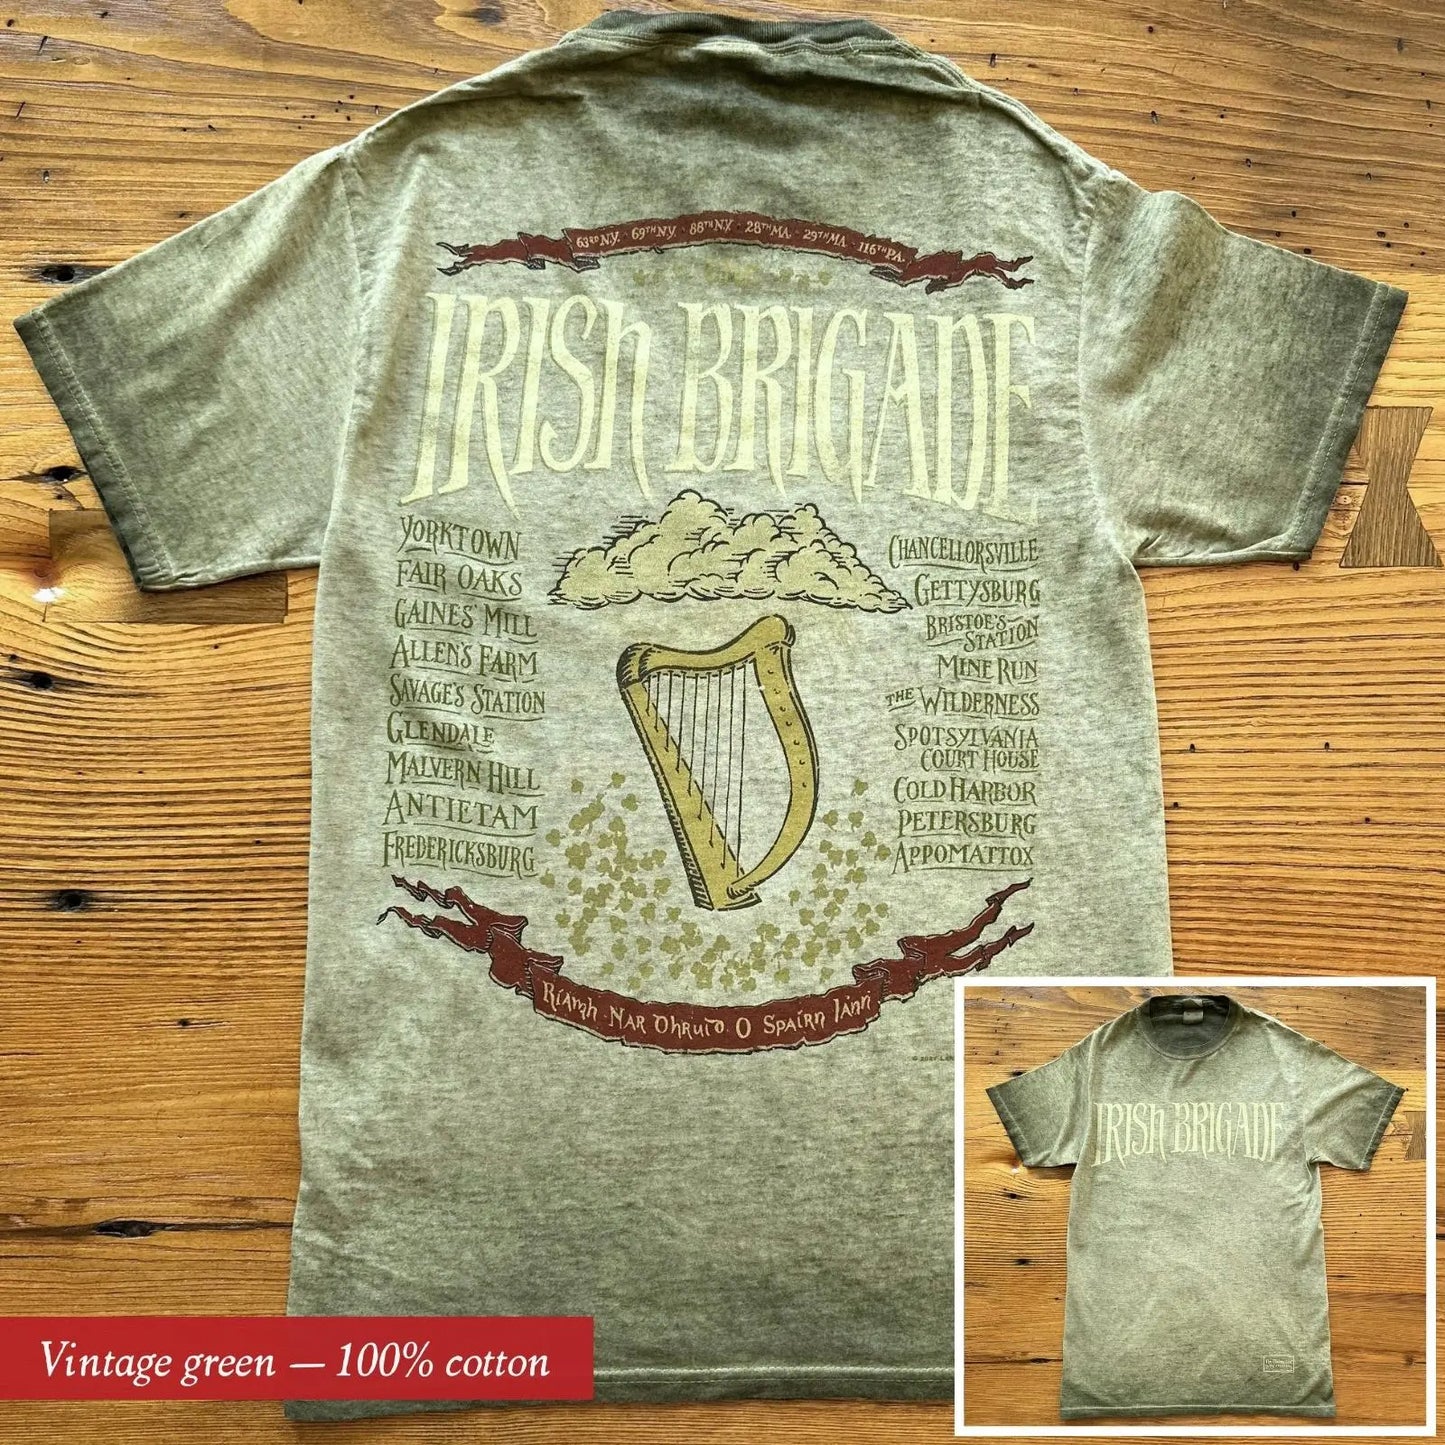 The Civil War "Irish Brigade" Shirt in Vintage green from The History List store